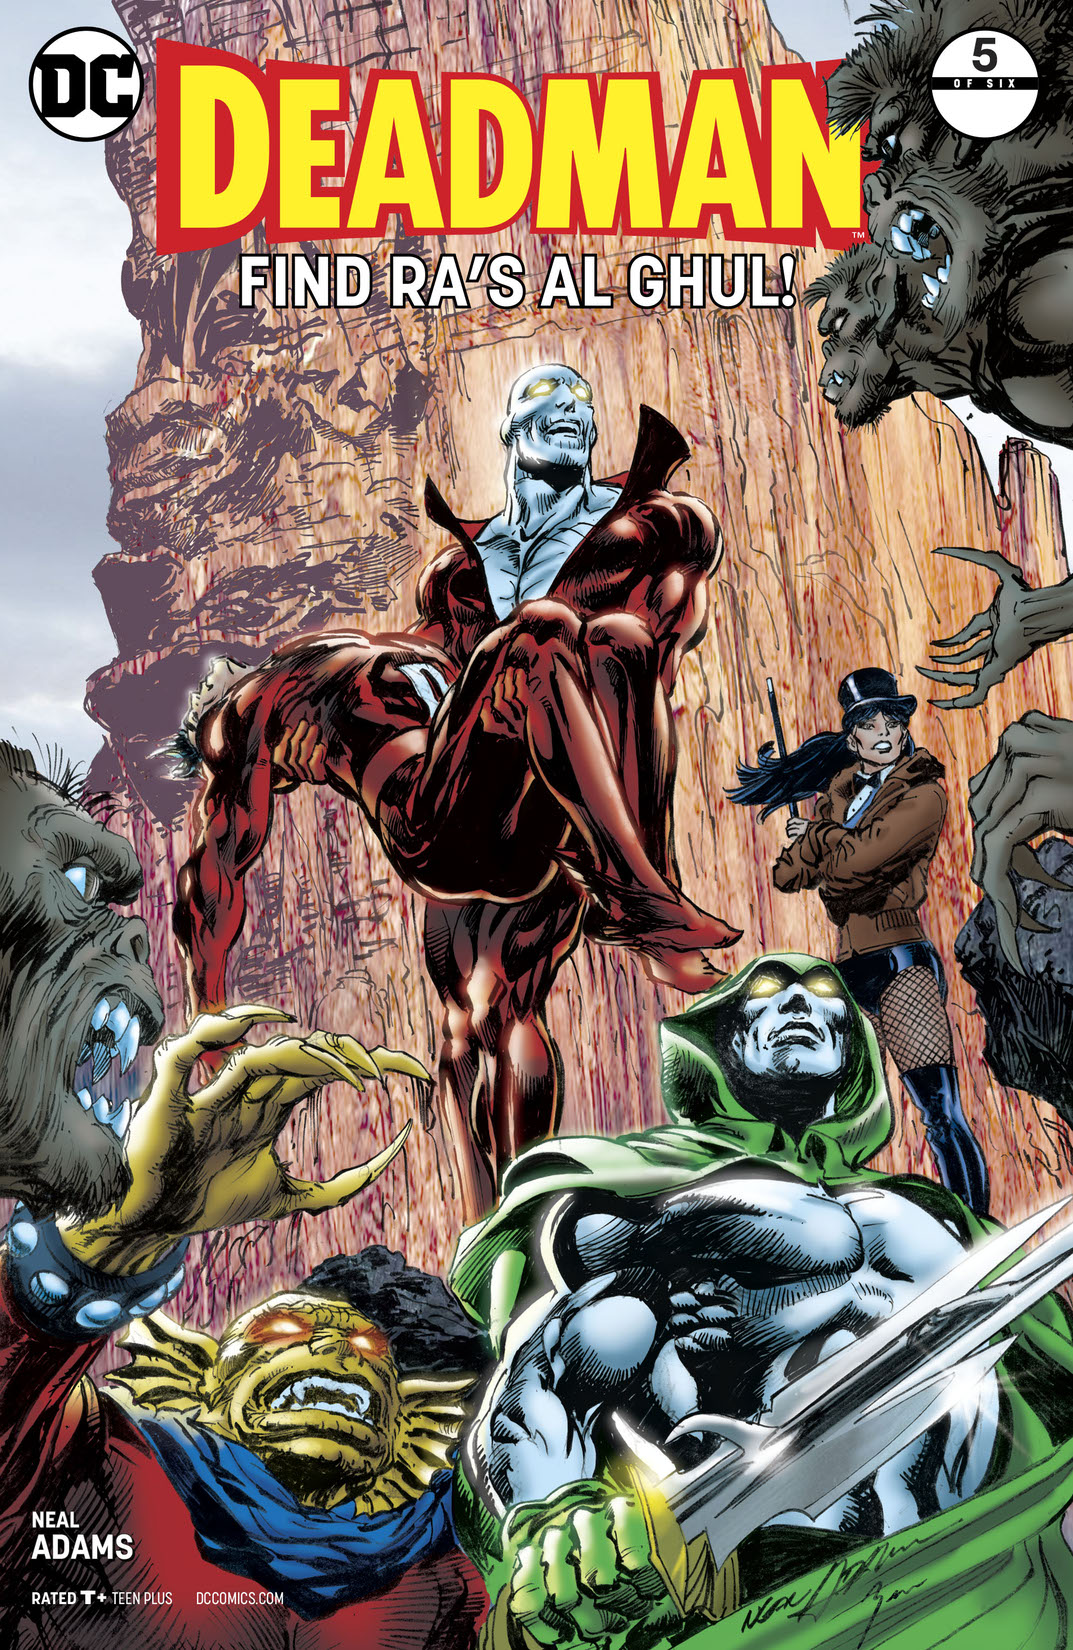 Deadman by Neal Adams #5 preview images